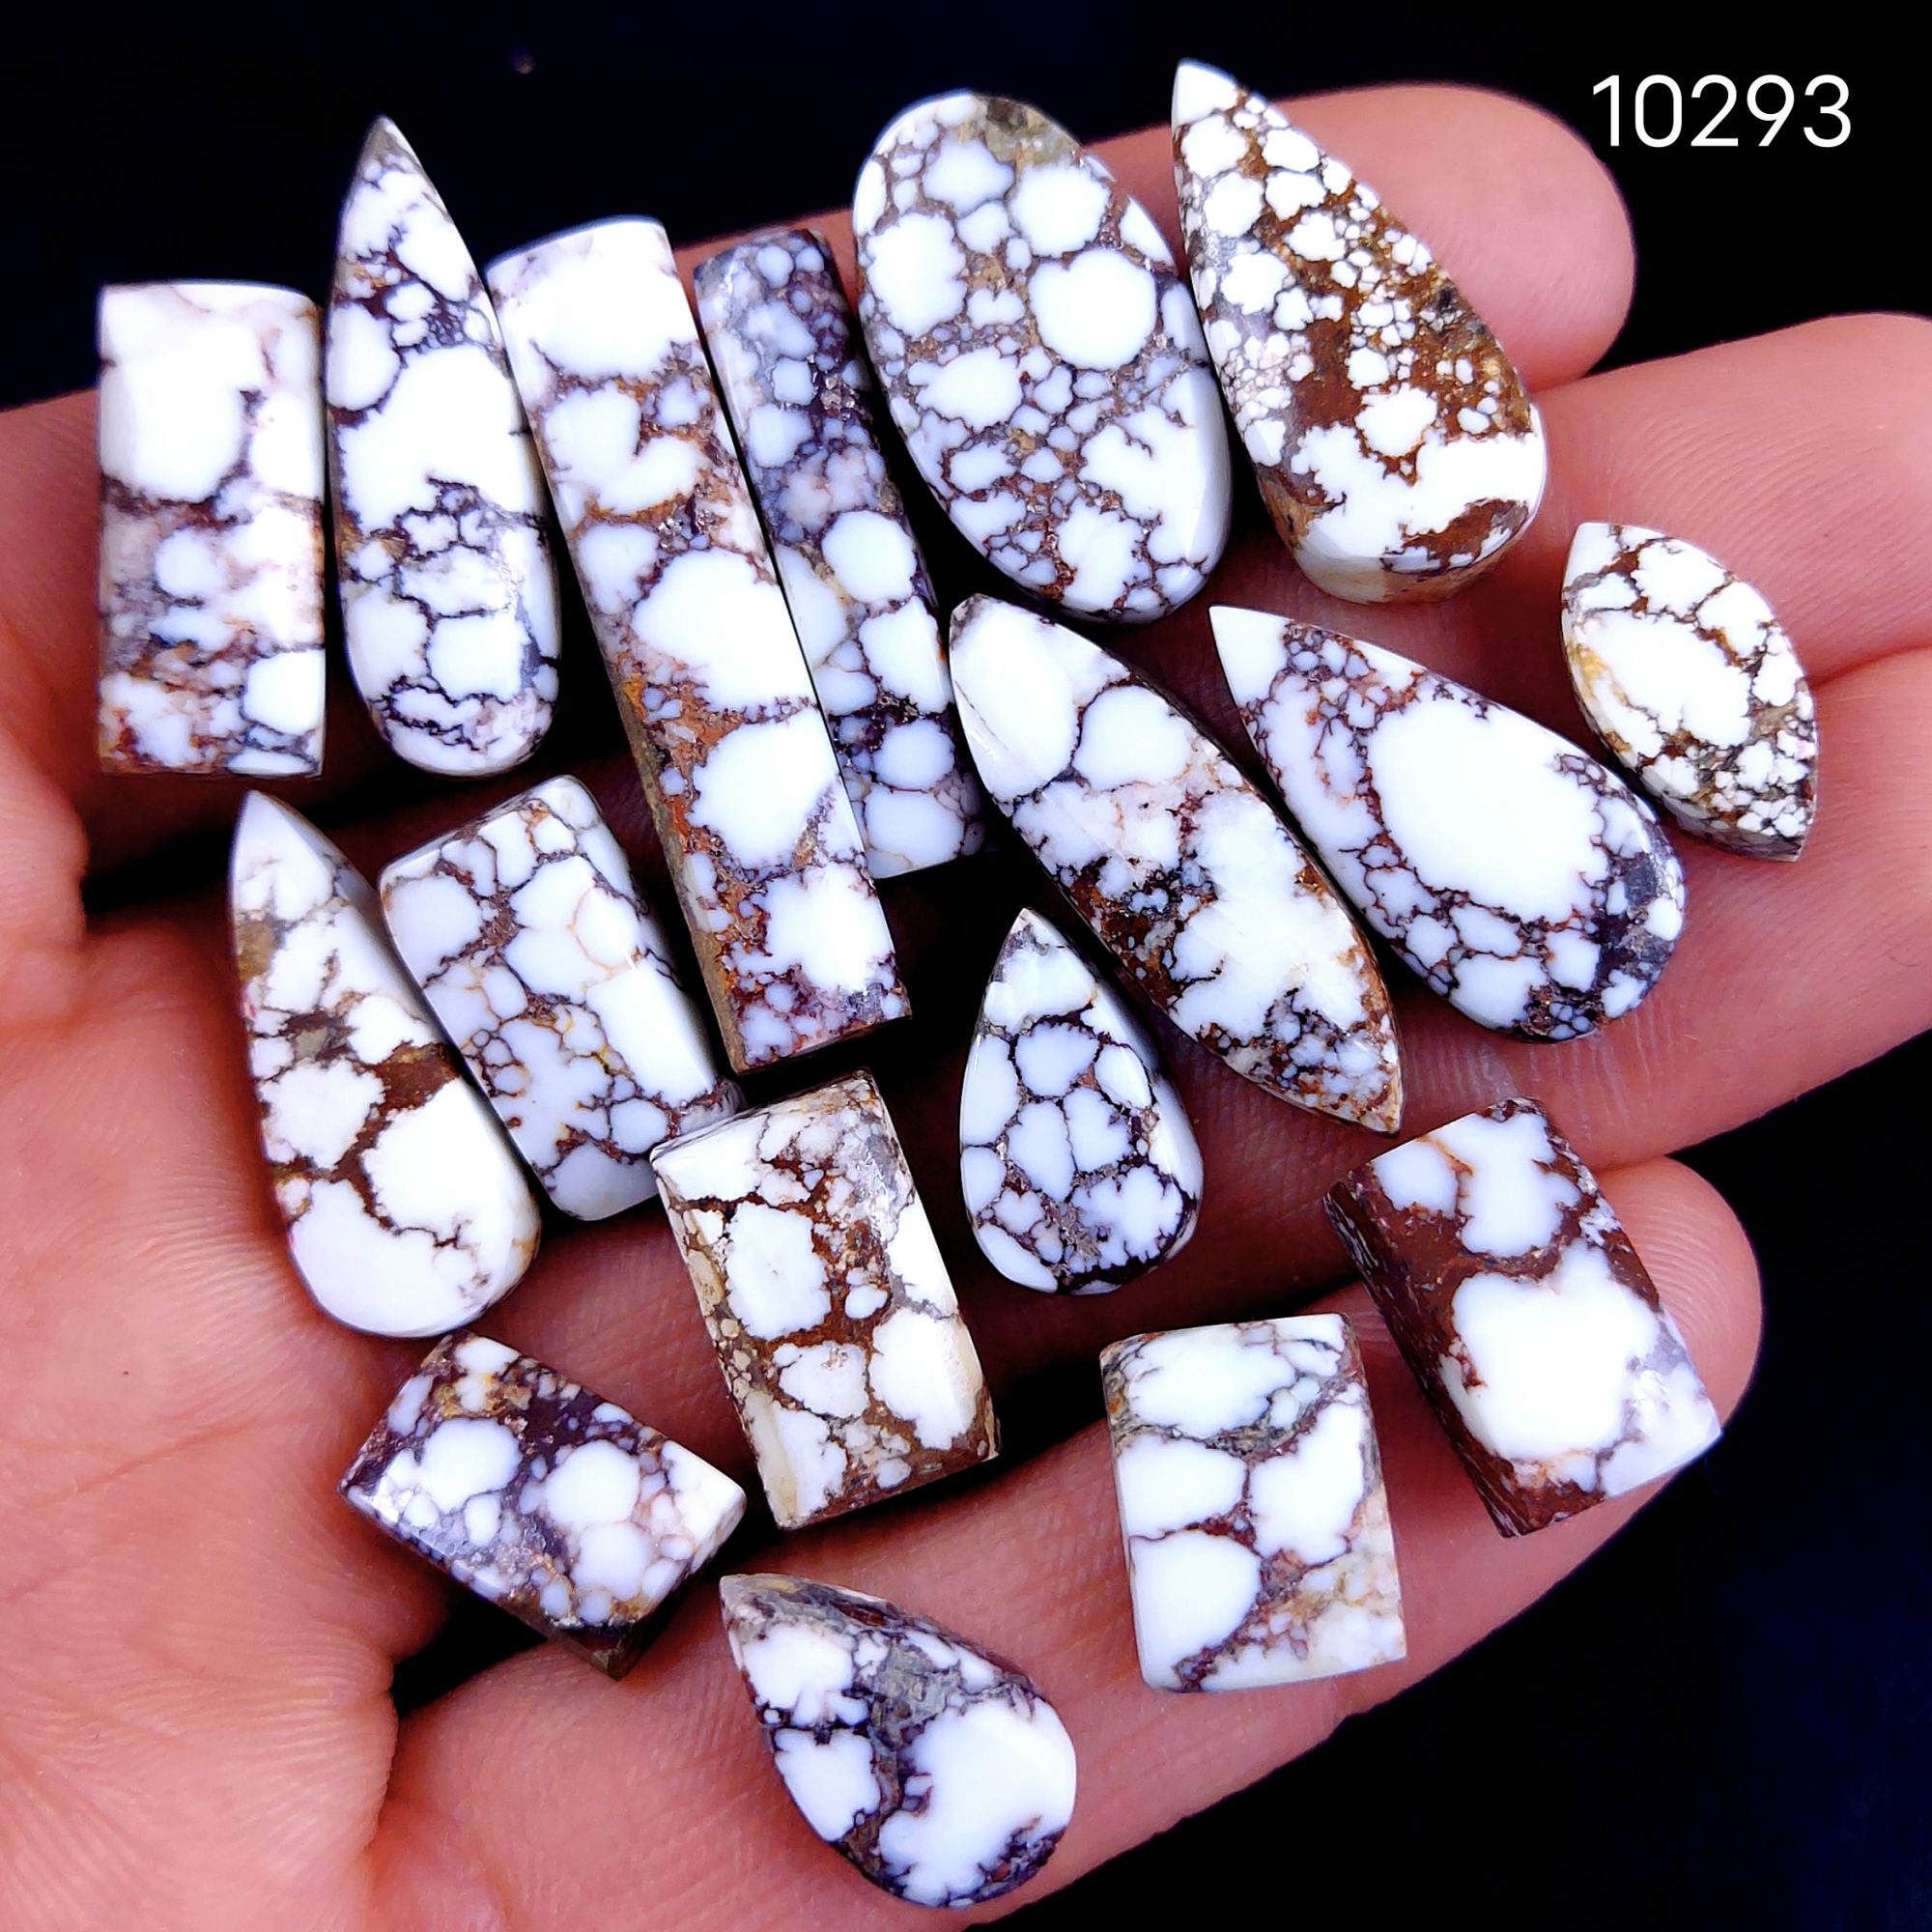 17Pc 184Cts Natural Wild Horse Magnesite Turquoise Cabochon Polished Loose Gemstone Flat Back Multi Jewelry Making Crystal  36x7 15x9mm #10293